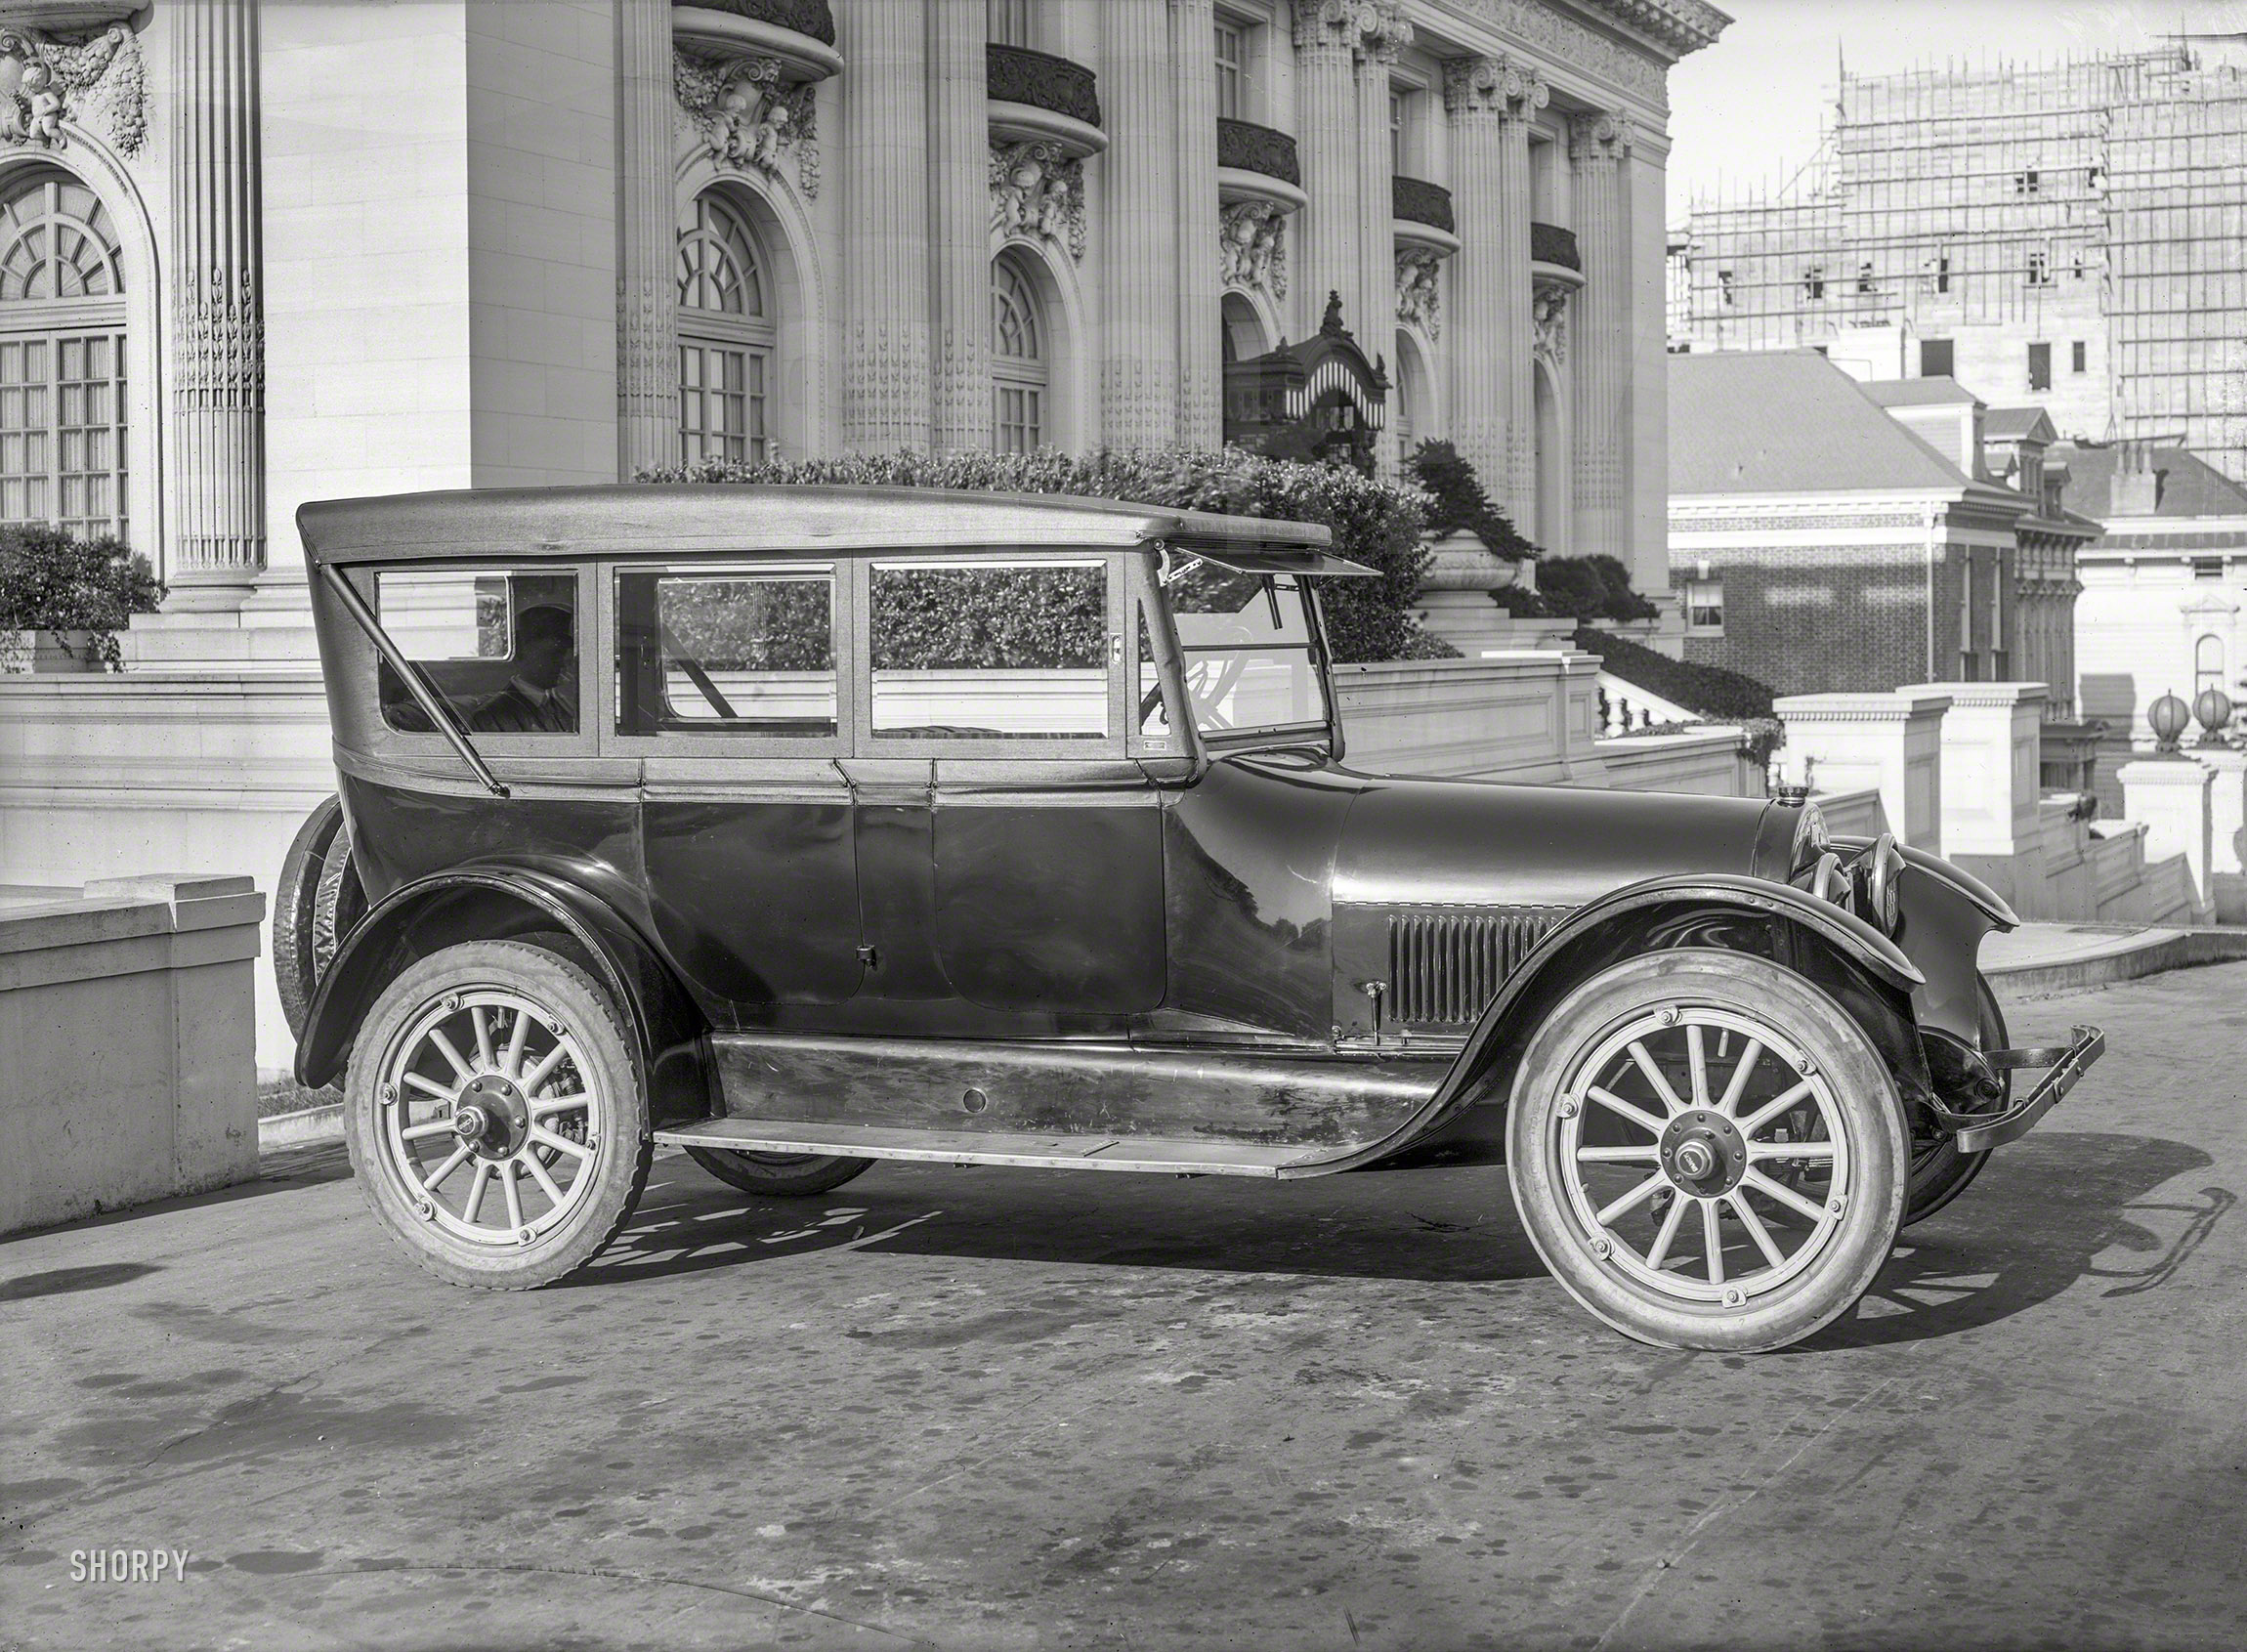 San Francisco circa 1920. "Buick, Pacific Heights." Wearing a spiffy "California top." 5x7 glass negative by Christopher Helin. View full size.